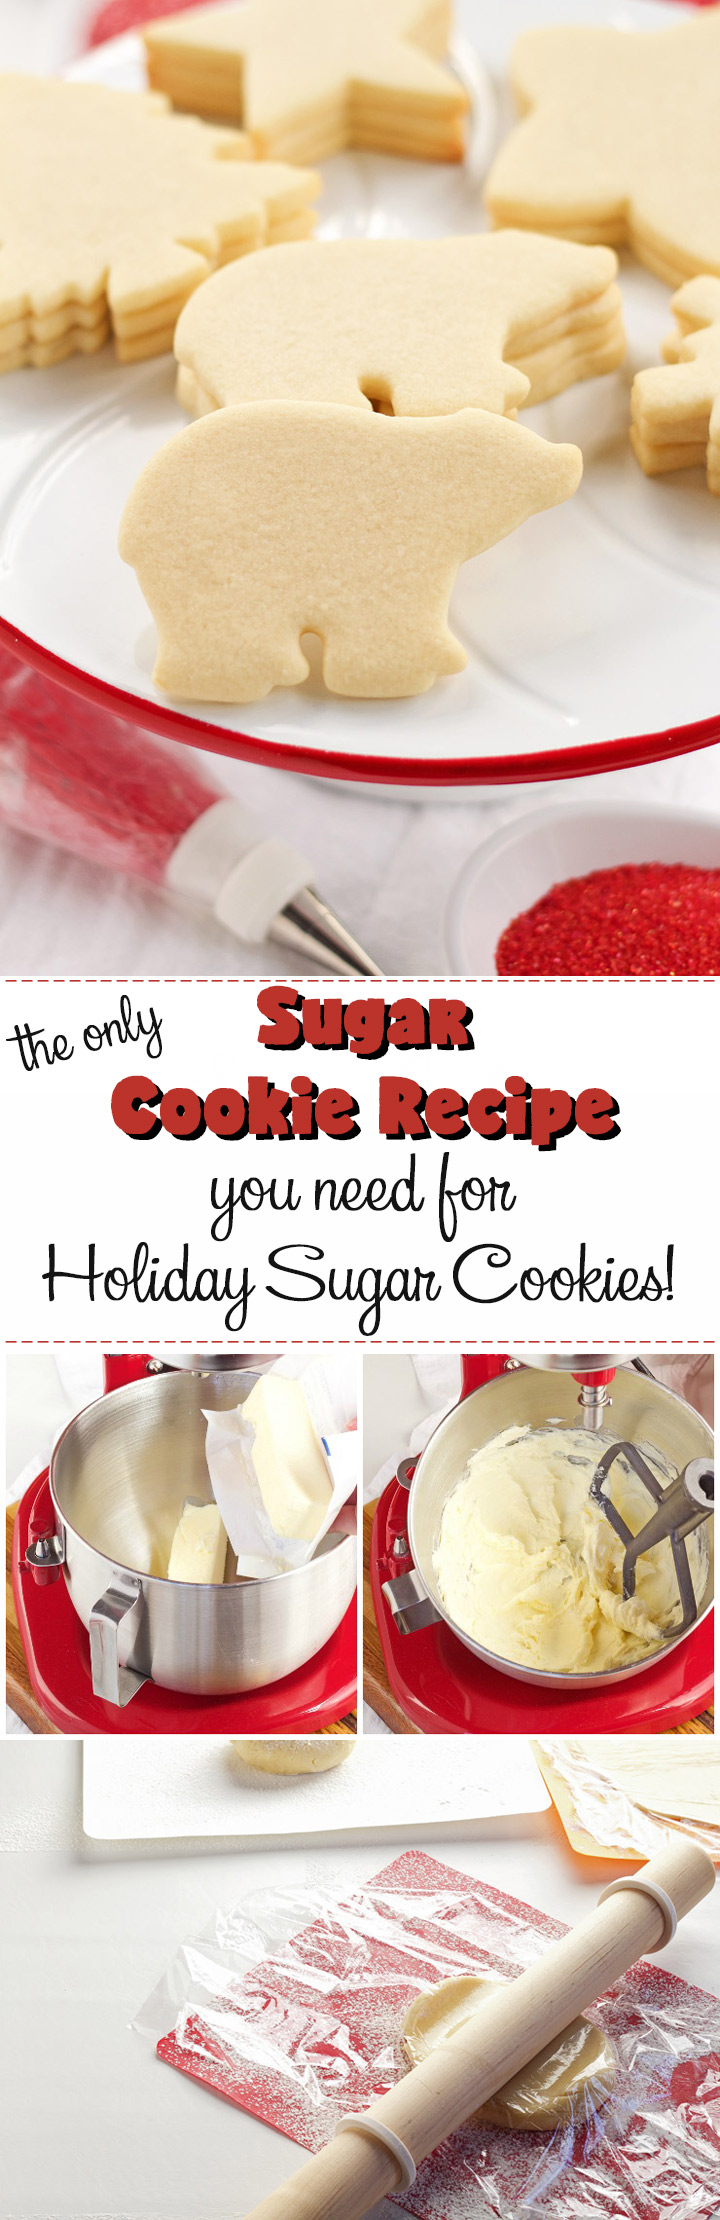 This is the ONLY Sugar Cookie Recipe You'll NEED for your Holiday Sugar Cookies | The Bearfoot Baker